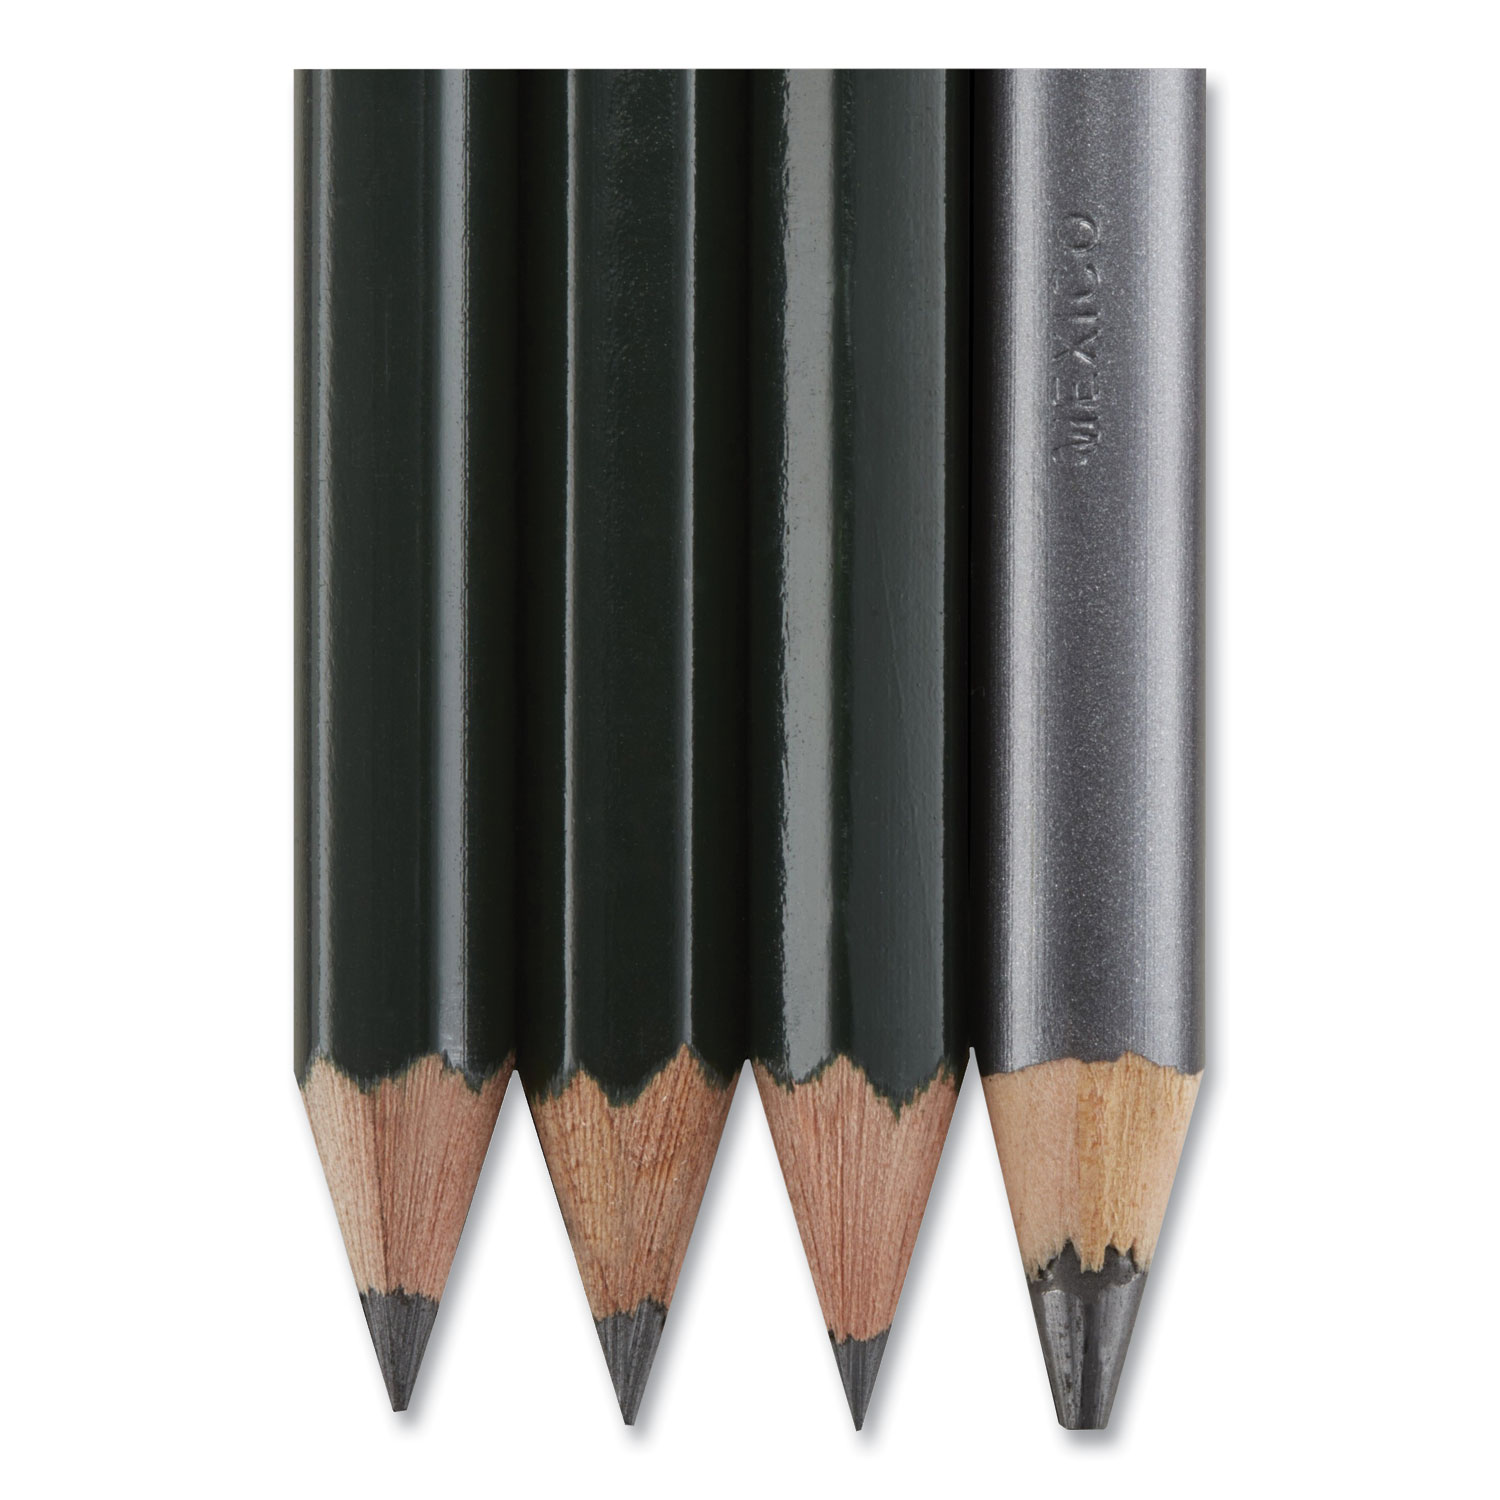 Scholar Graphite Pencil Set, 2 mm, Assorted Lead Hardness Ratings